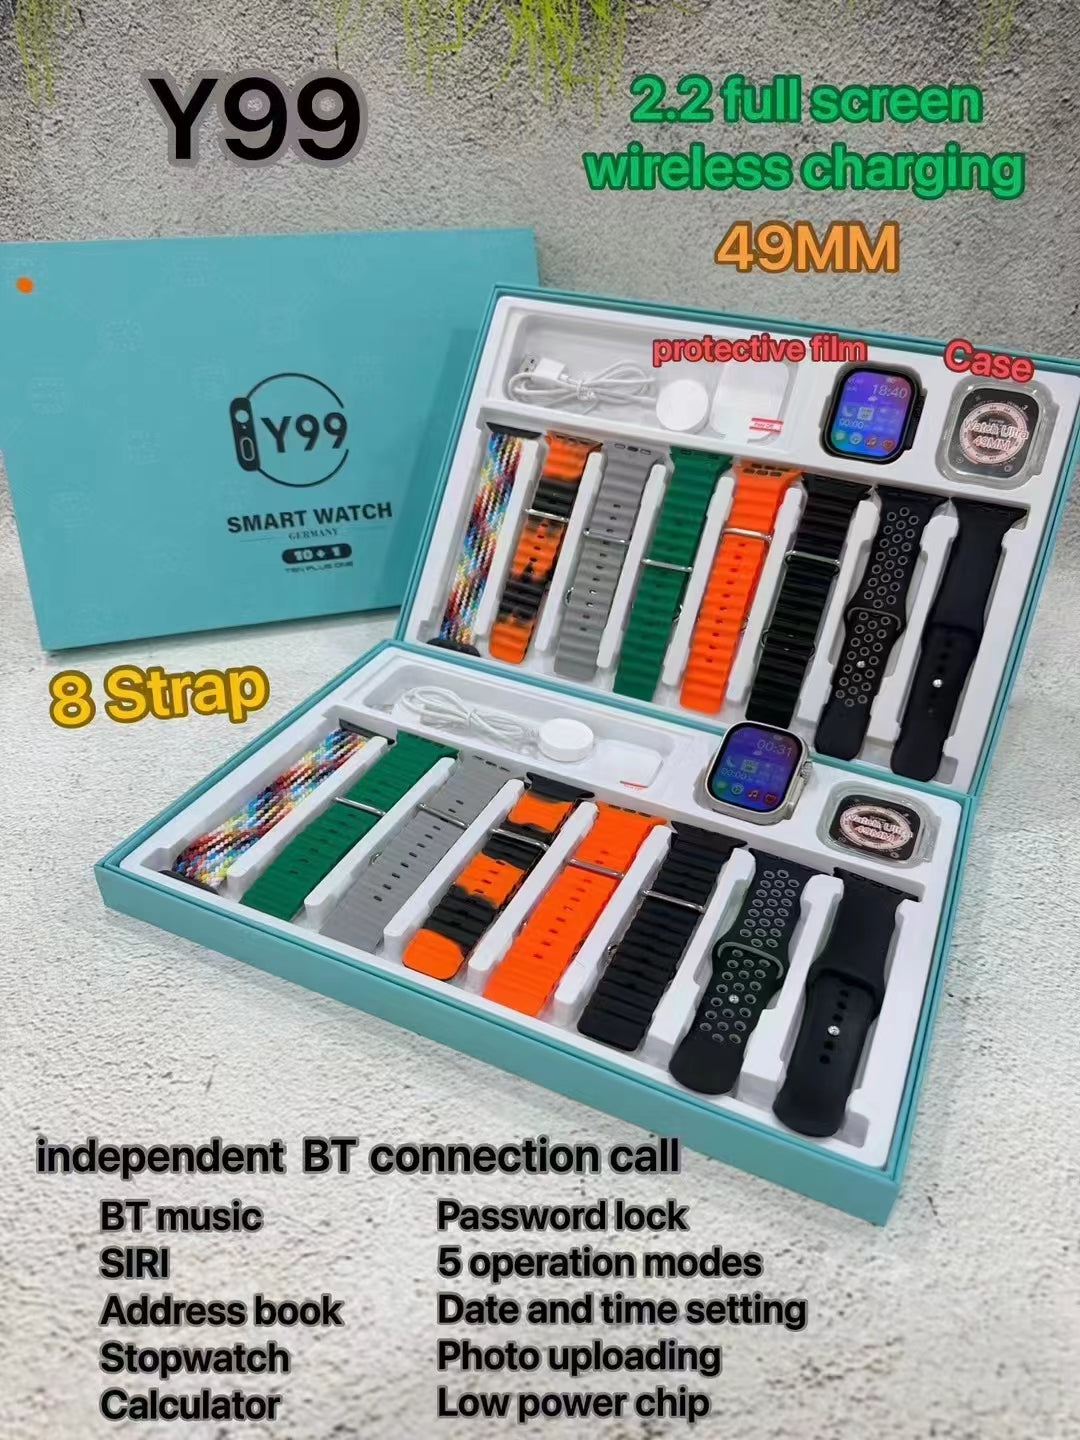 Y99 Ultra Smart watch with 8 Straps and Case with gift packing